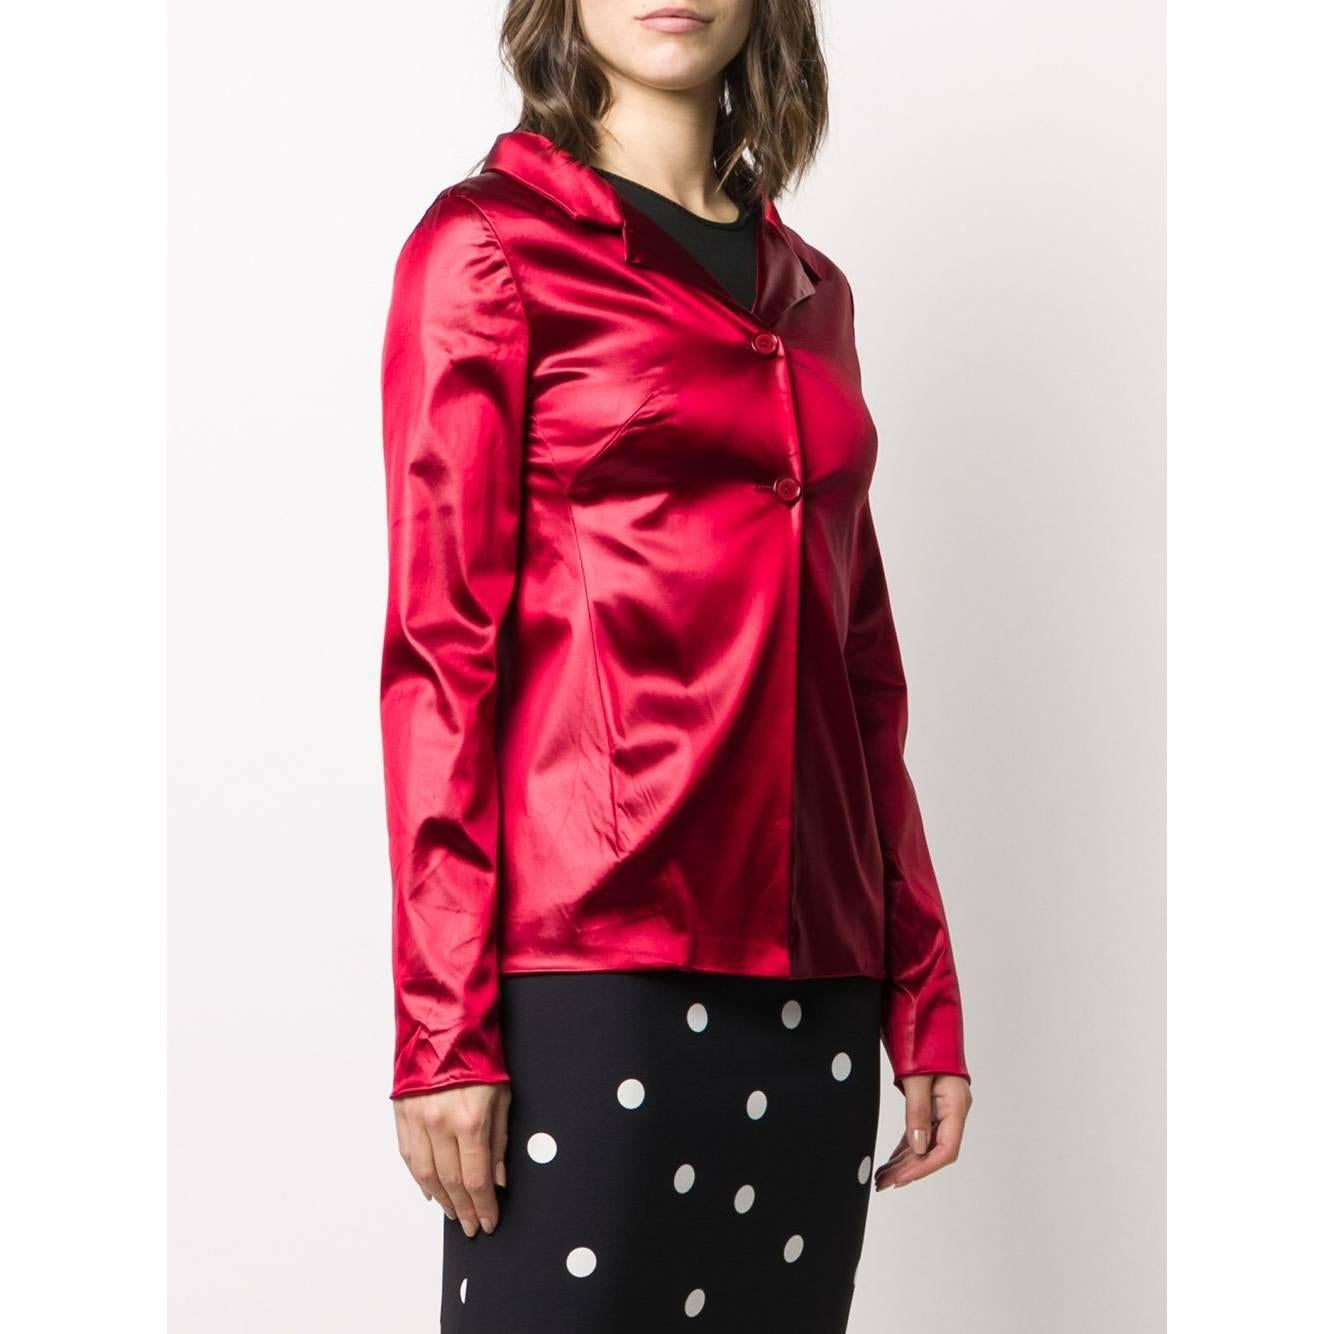 Dolce & Gabbana iridescent red jacket. Classic lapel collar, long sleeves and front closure with two buttons.

Size: 40 IT

Flat measurements
Height: 63 cm
Bust: 41 cm
Shoulders: 39 cm
Sleeves: 63 cm

Product code: A5654

Notes: The product shows